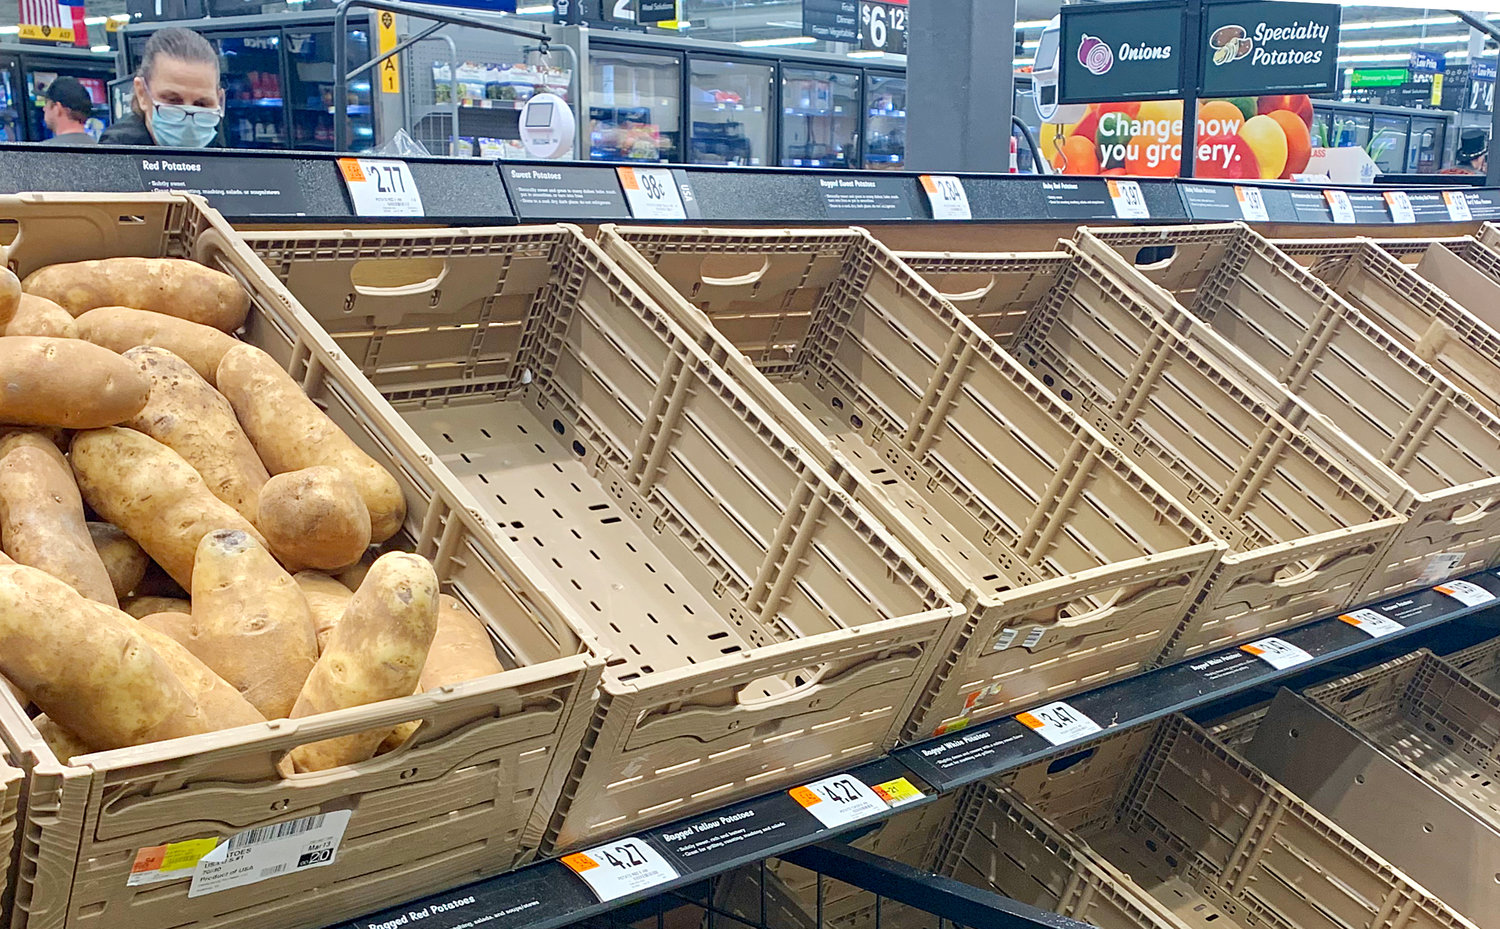 Only one lone bin of potatoes was available on a recent shopping day at Walmart as many food items and health supplies have been in high demand. Supply chains are reported to remain robust. Many citizens like the one above have starting using masks in public.